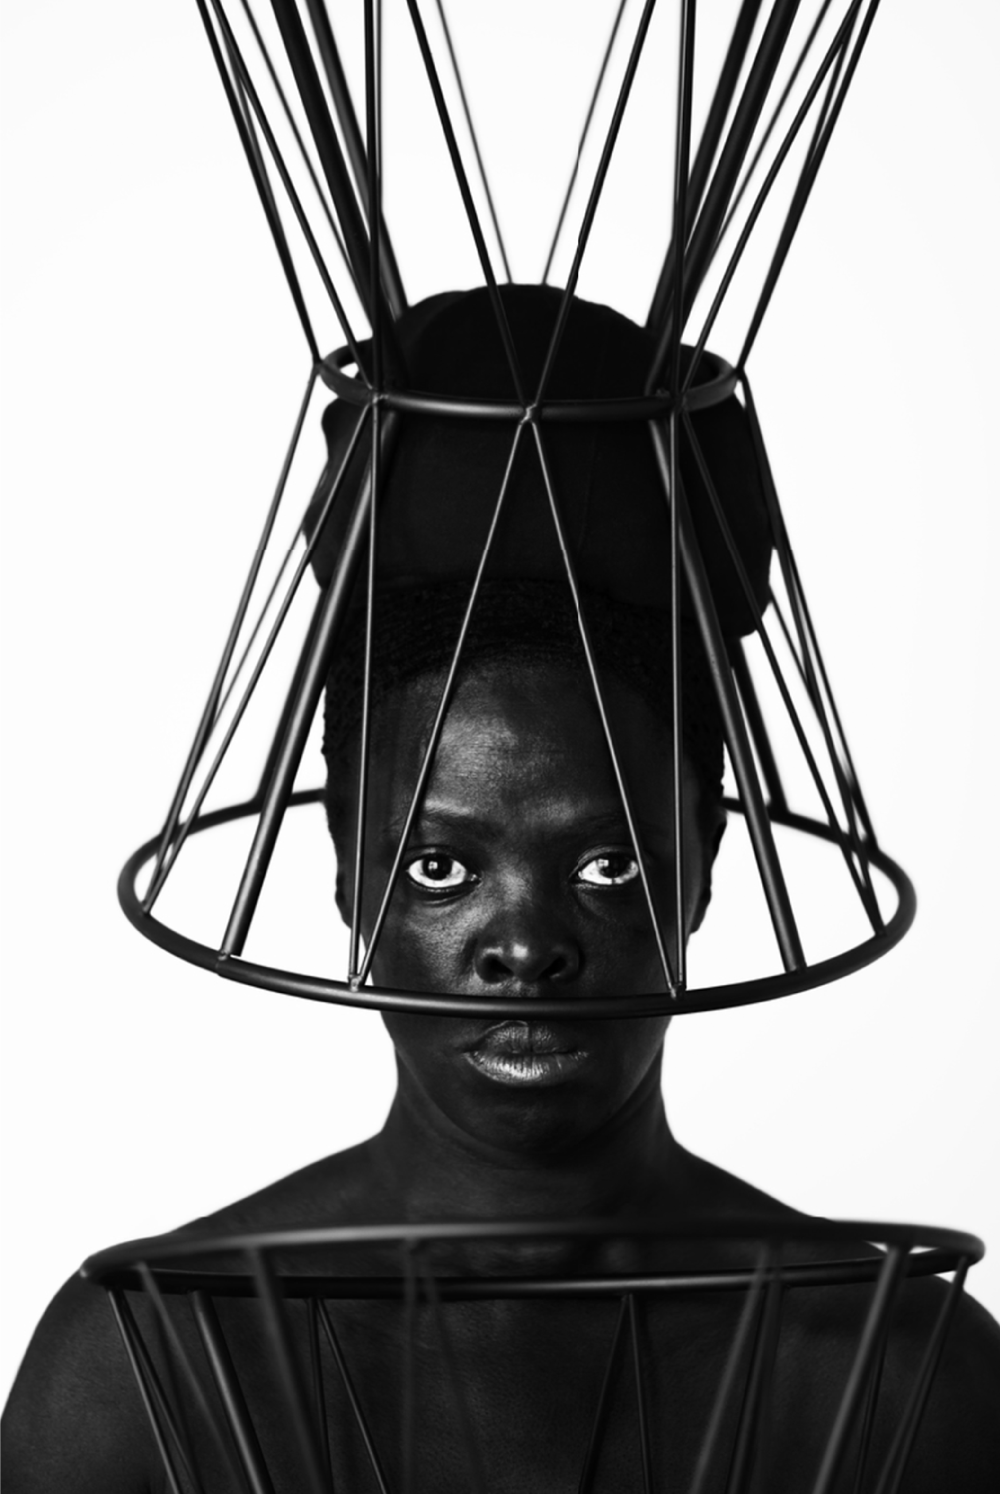 Person with a large metal headpiece staring directly into camera